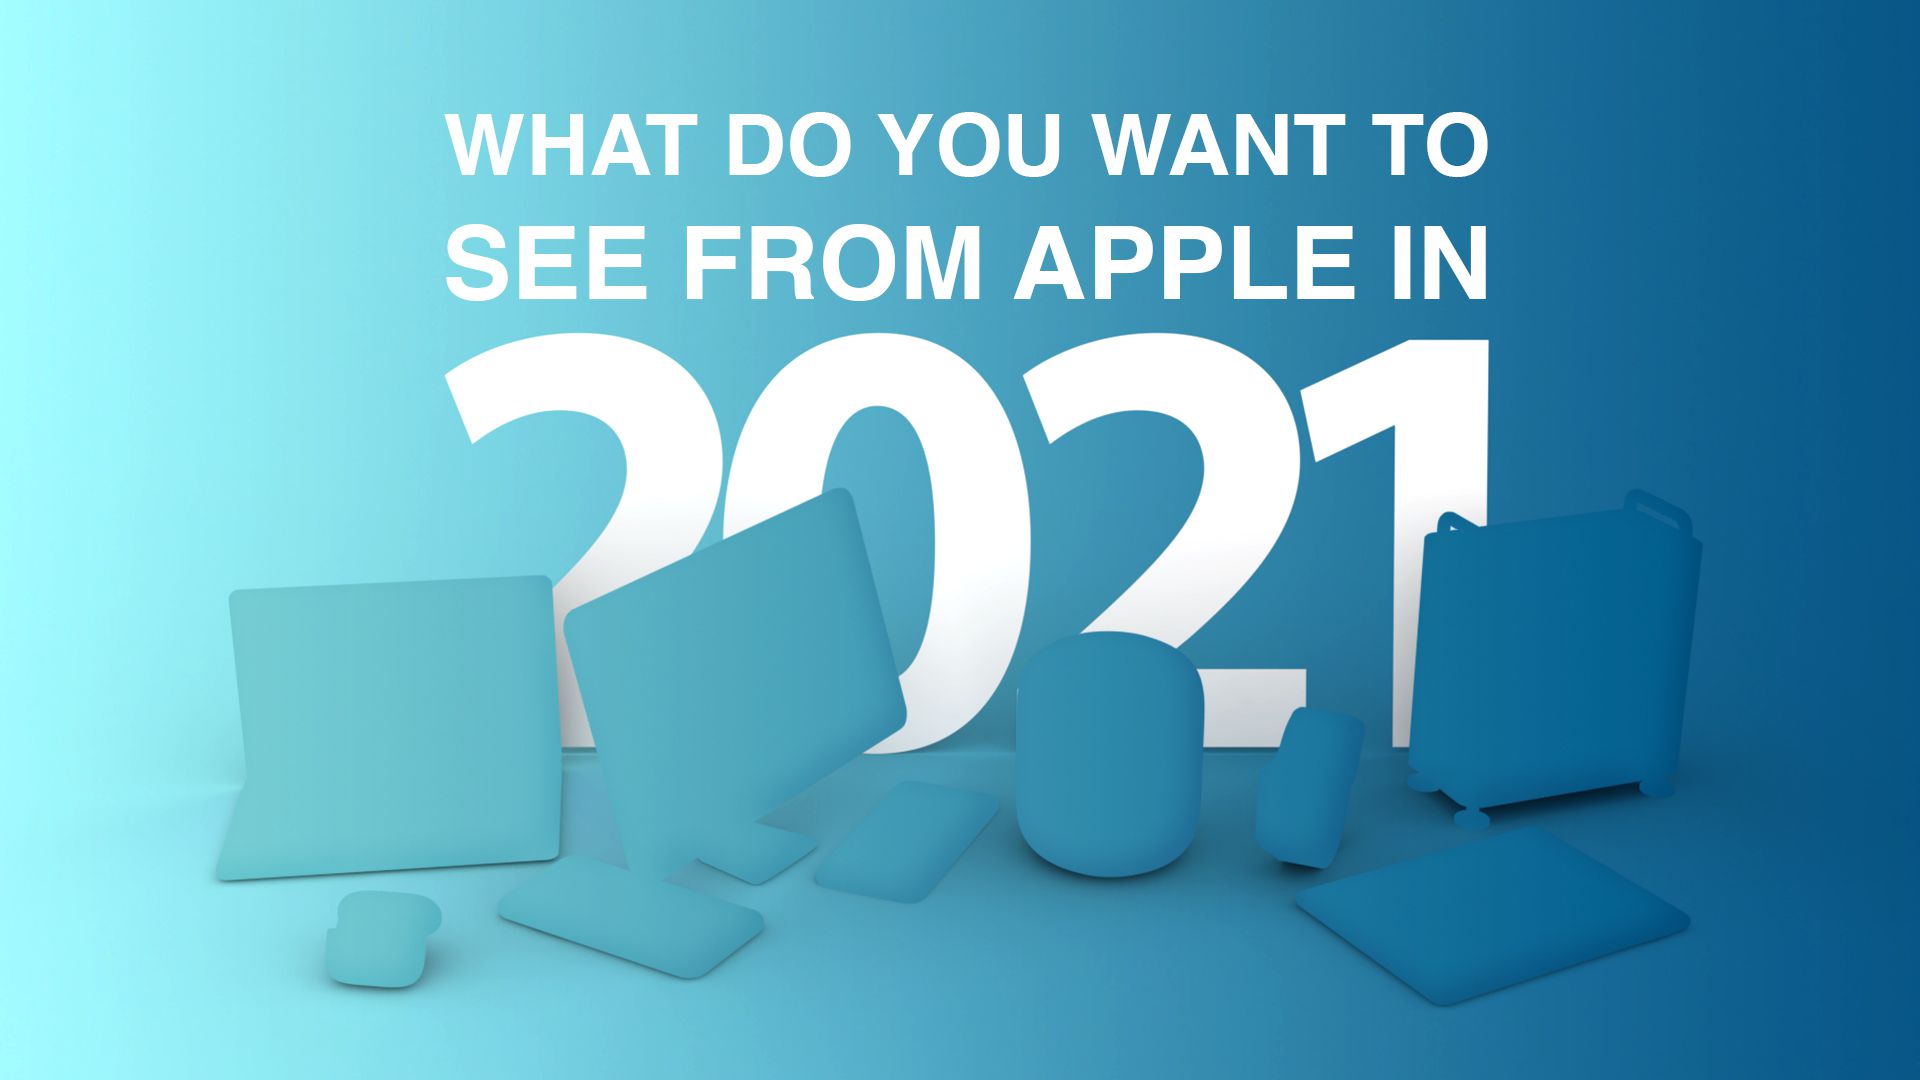 What do you want to see from Apple in 2021?